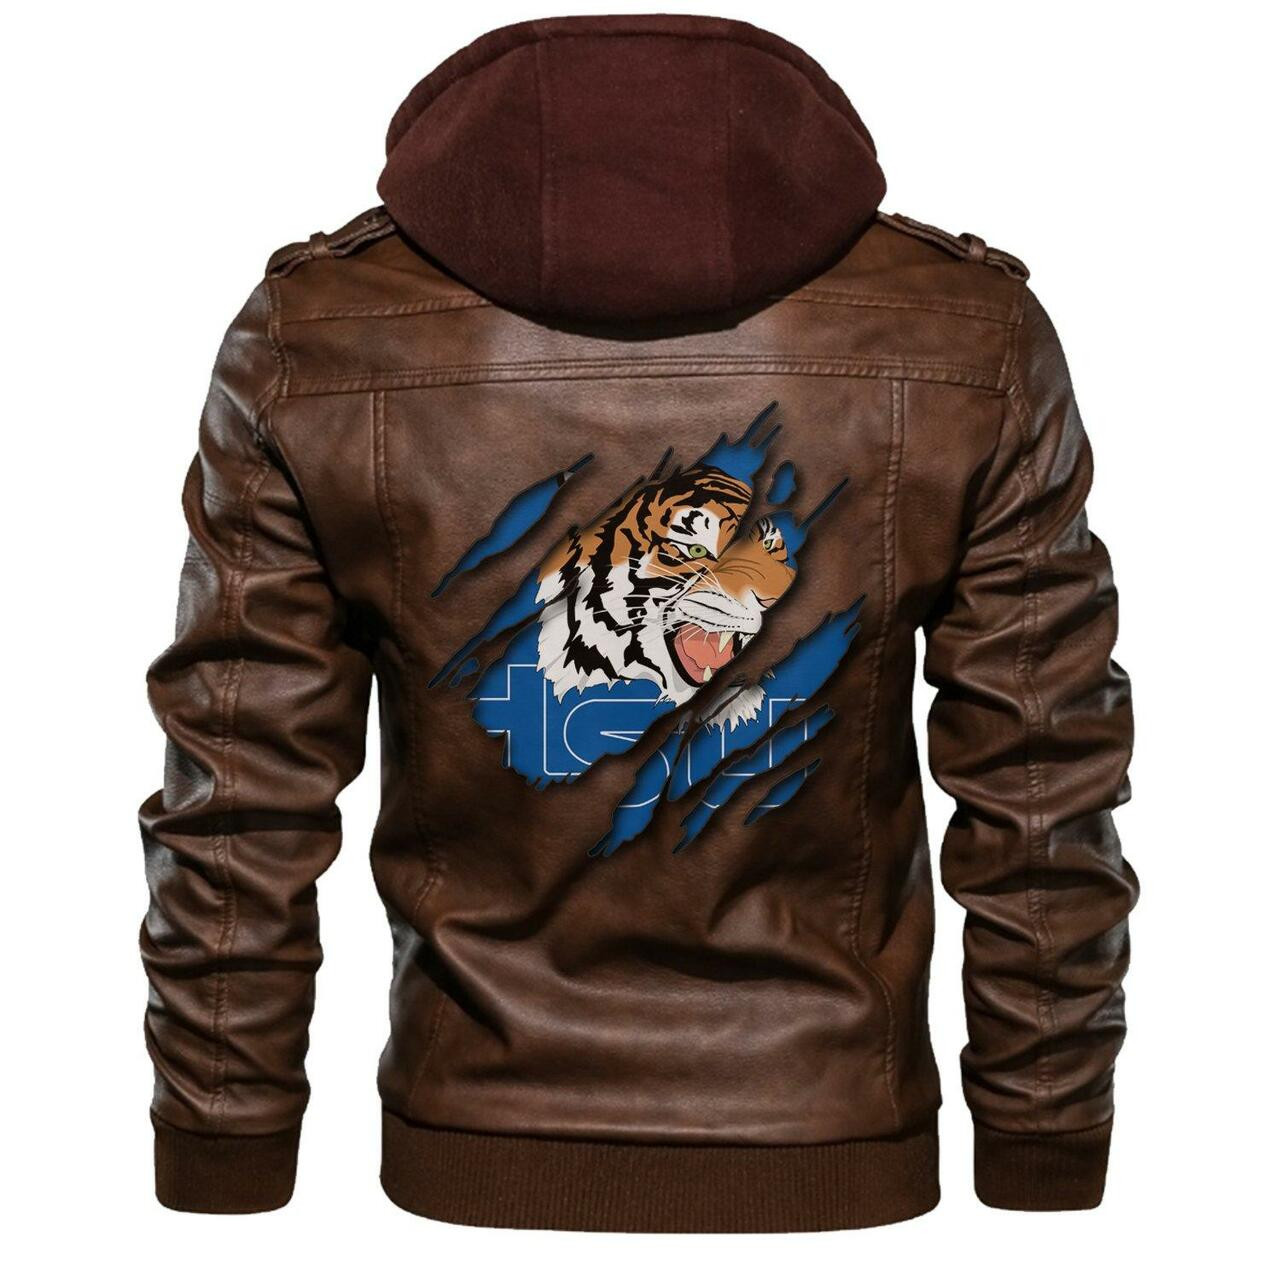 This leather Jacket will look great on you and make you stand out from the crowd 23